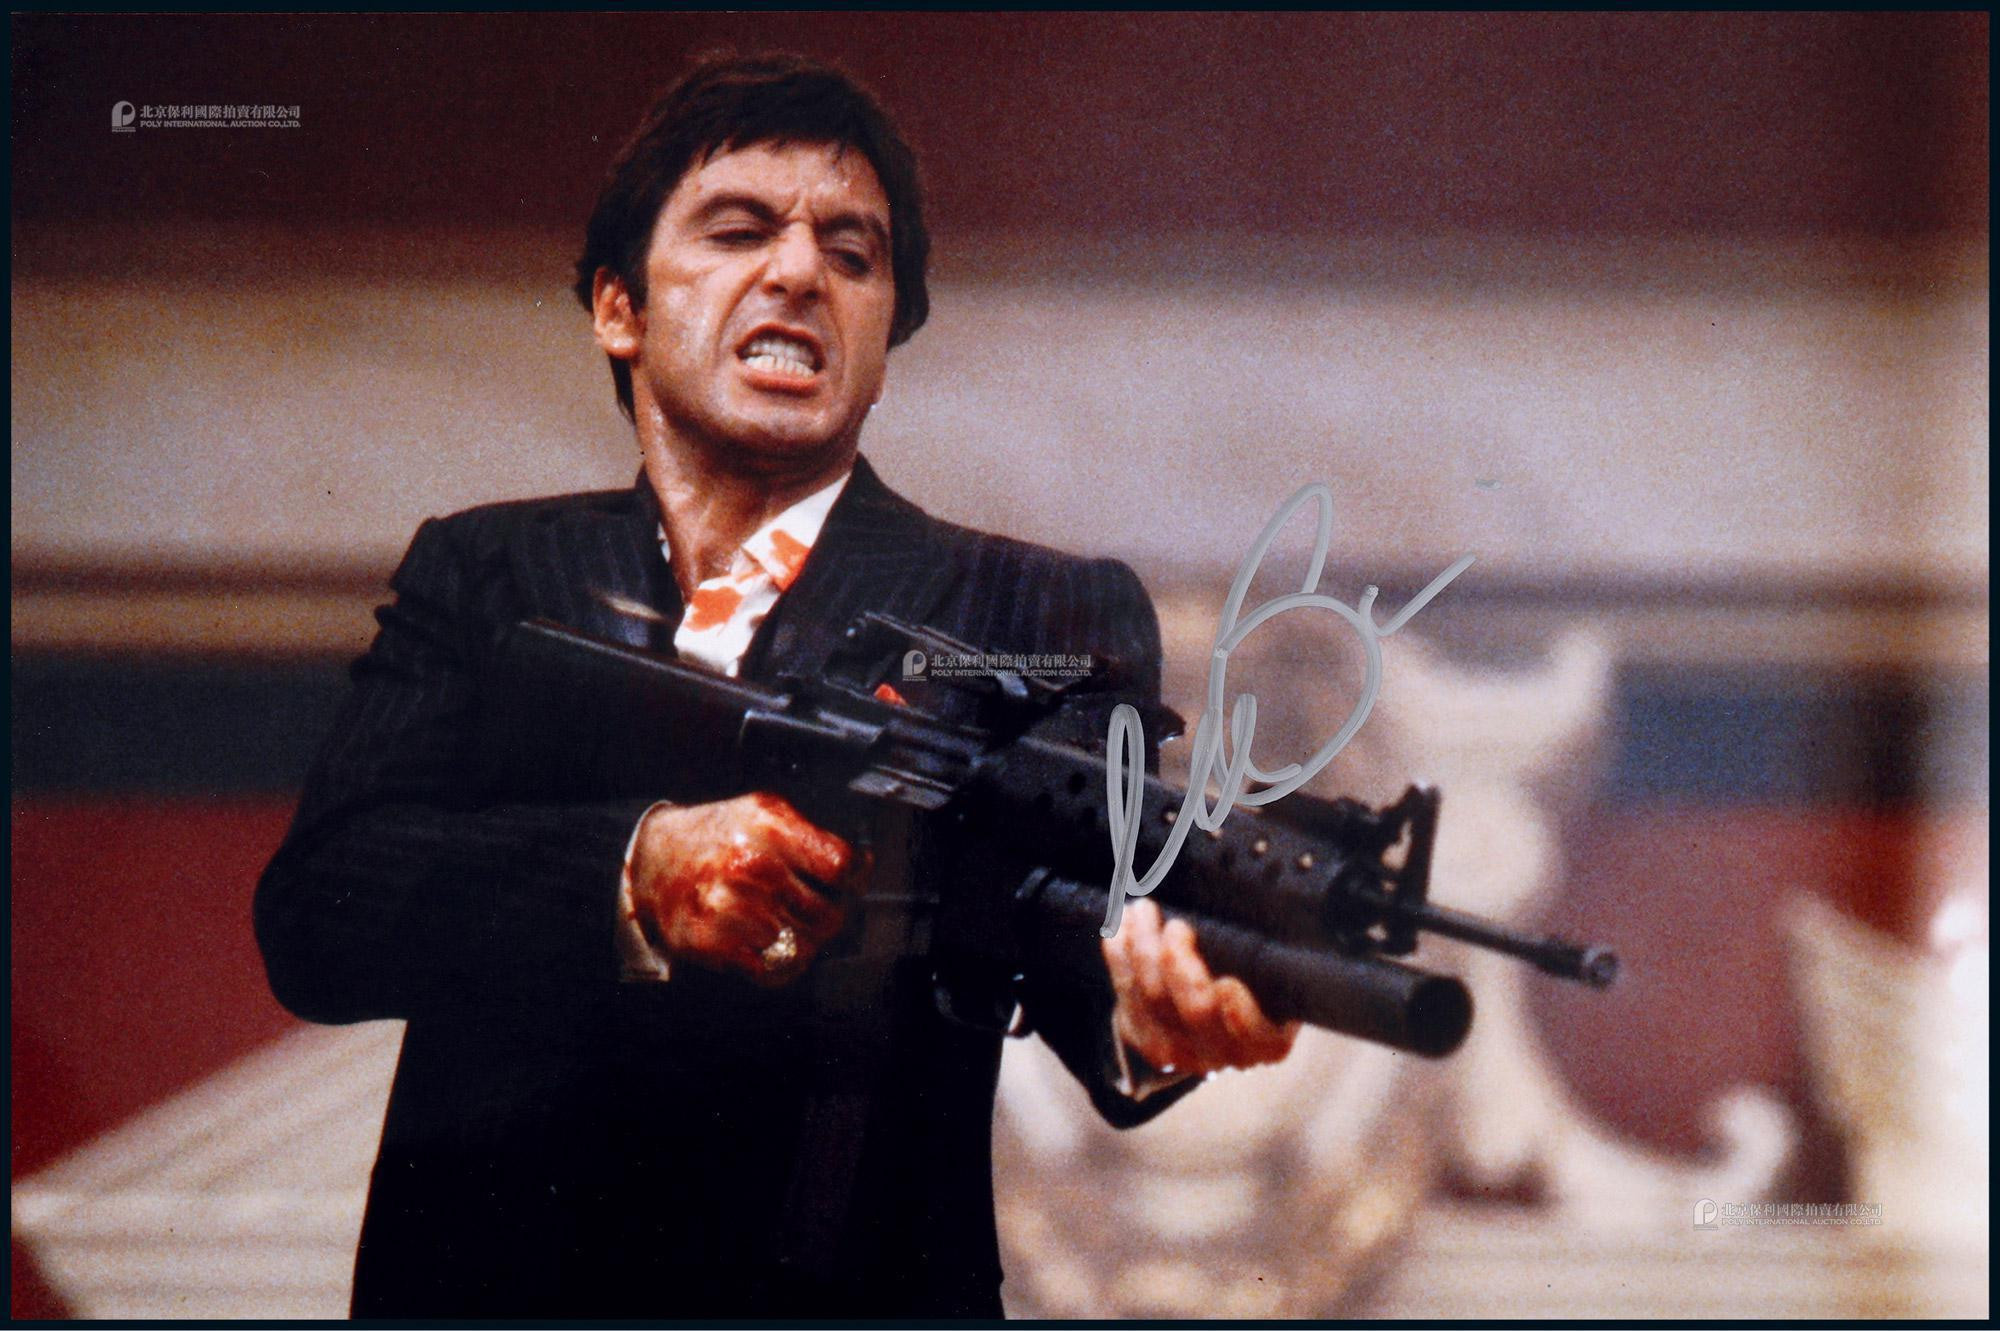 The autographed photo of Al Pacino, the “Best Actor of Oscar”, with certificate